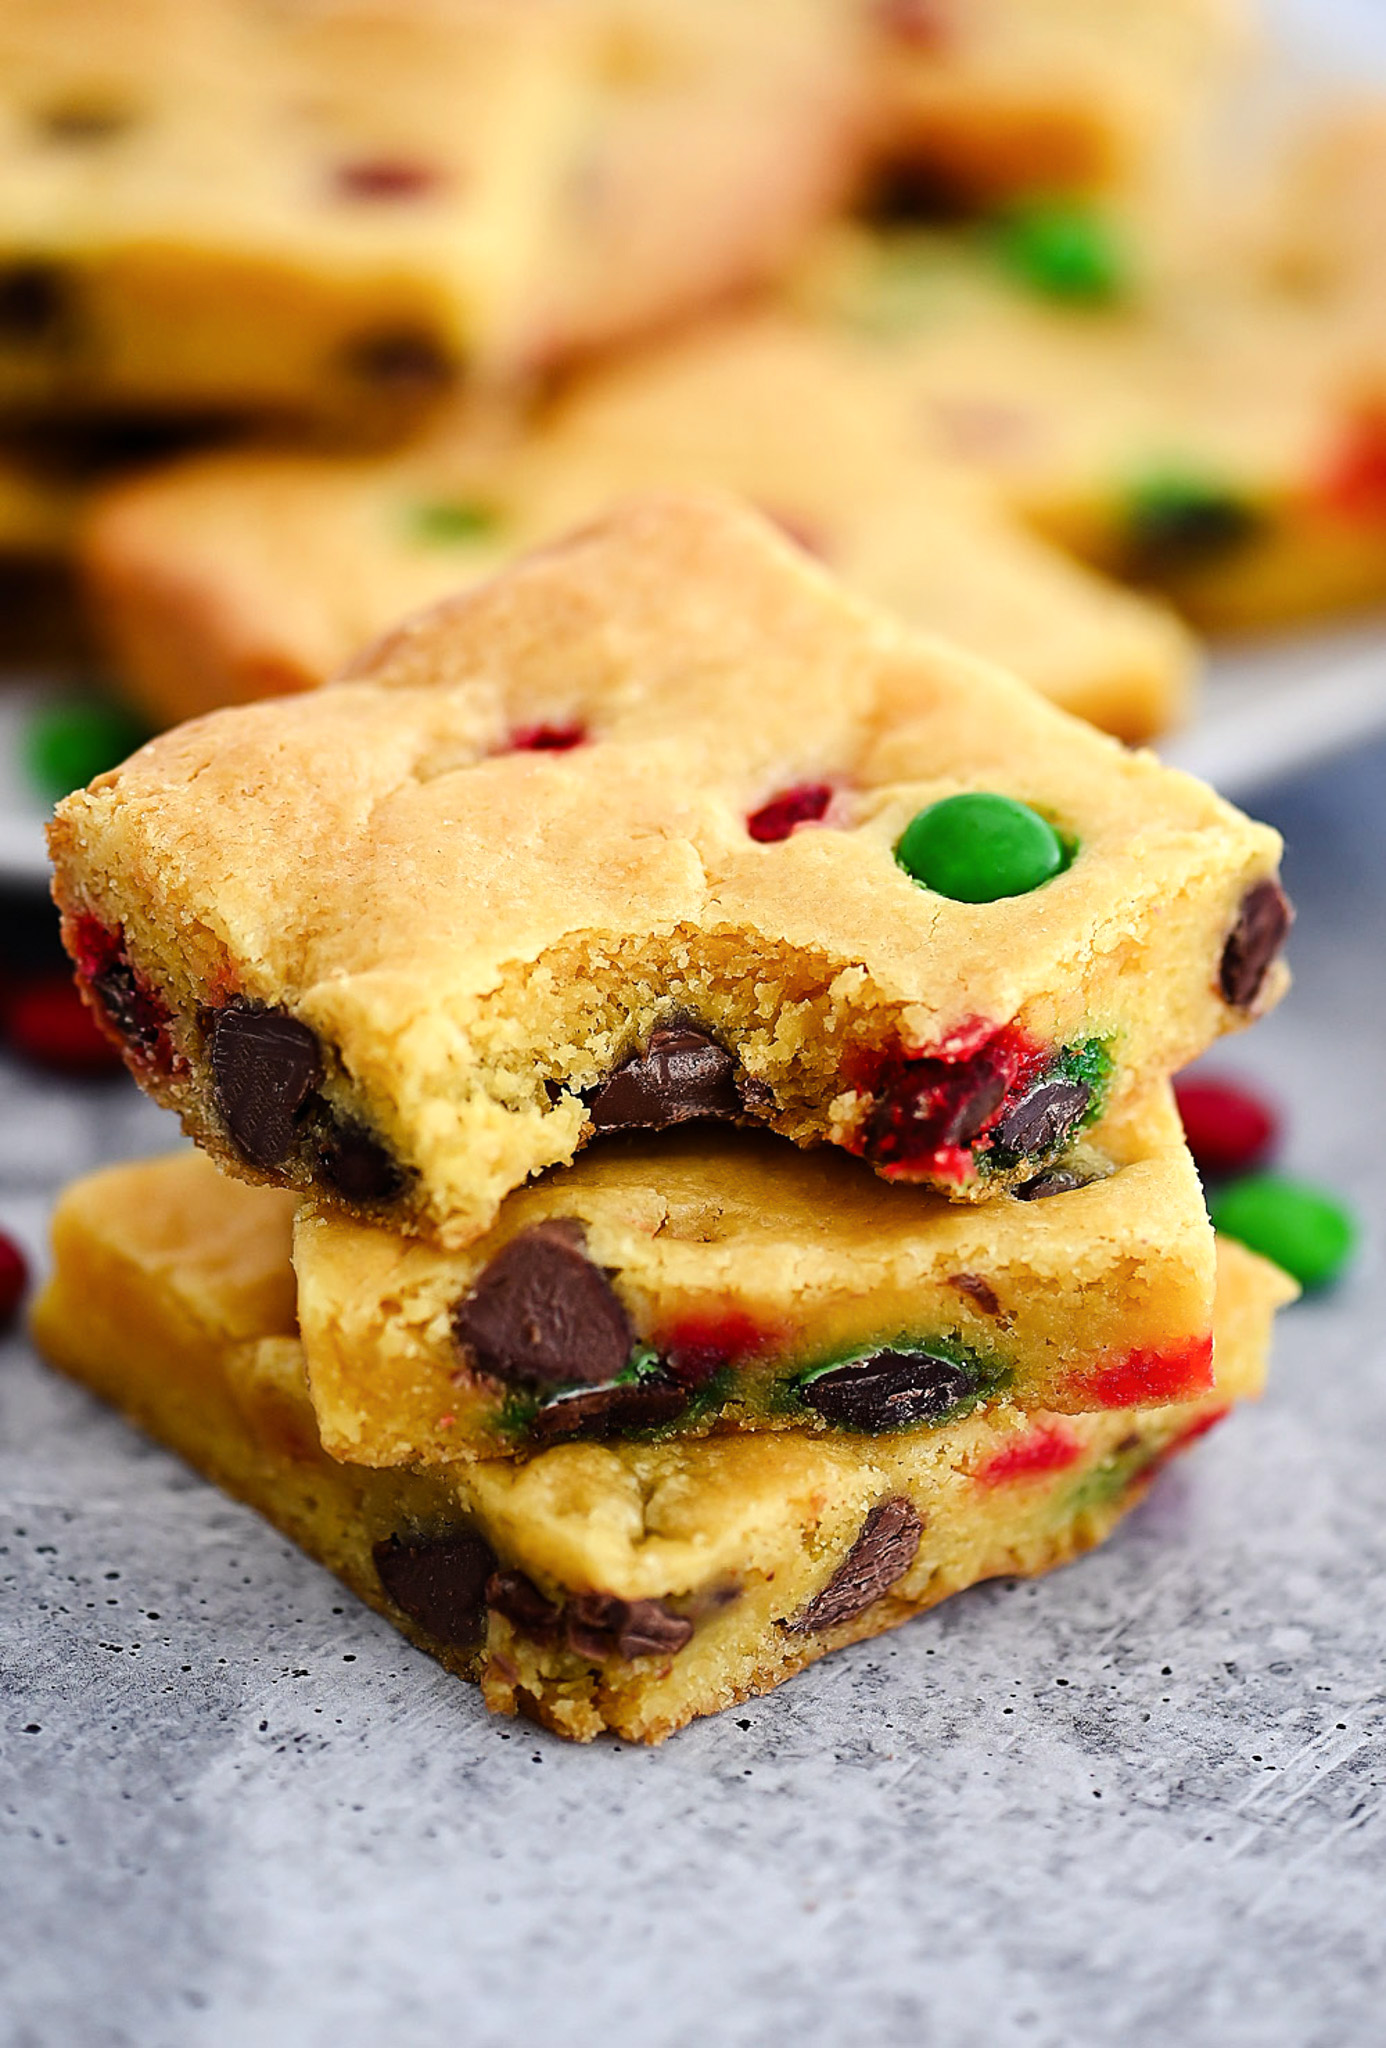 Cake Mix Cookie Bars are soft, chewy and loaded with chocolate chips and M&M's. Life-in-the-Lofthouse.com